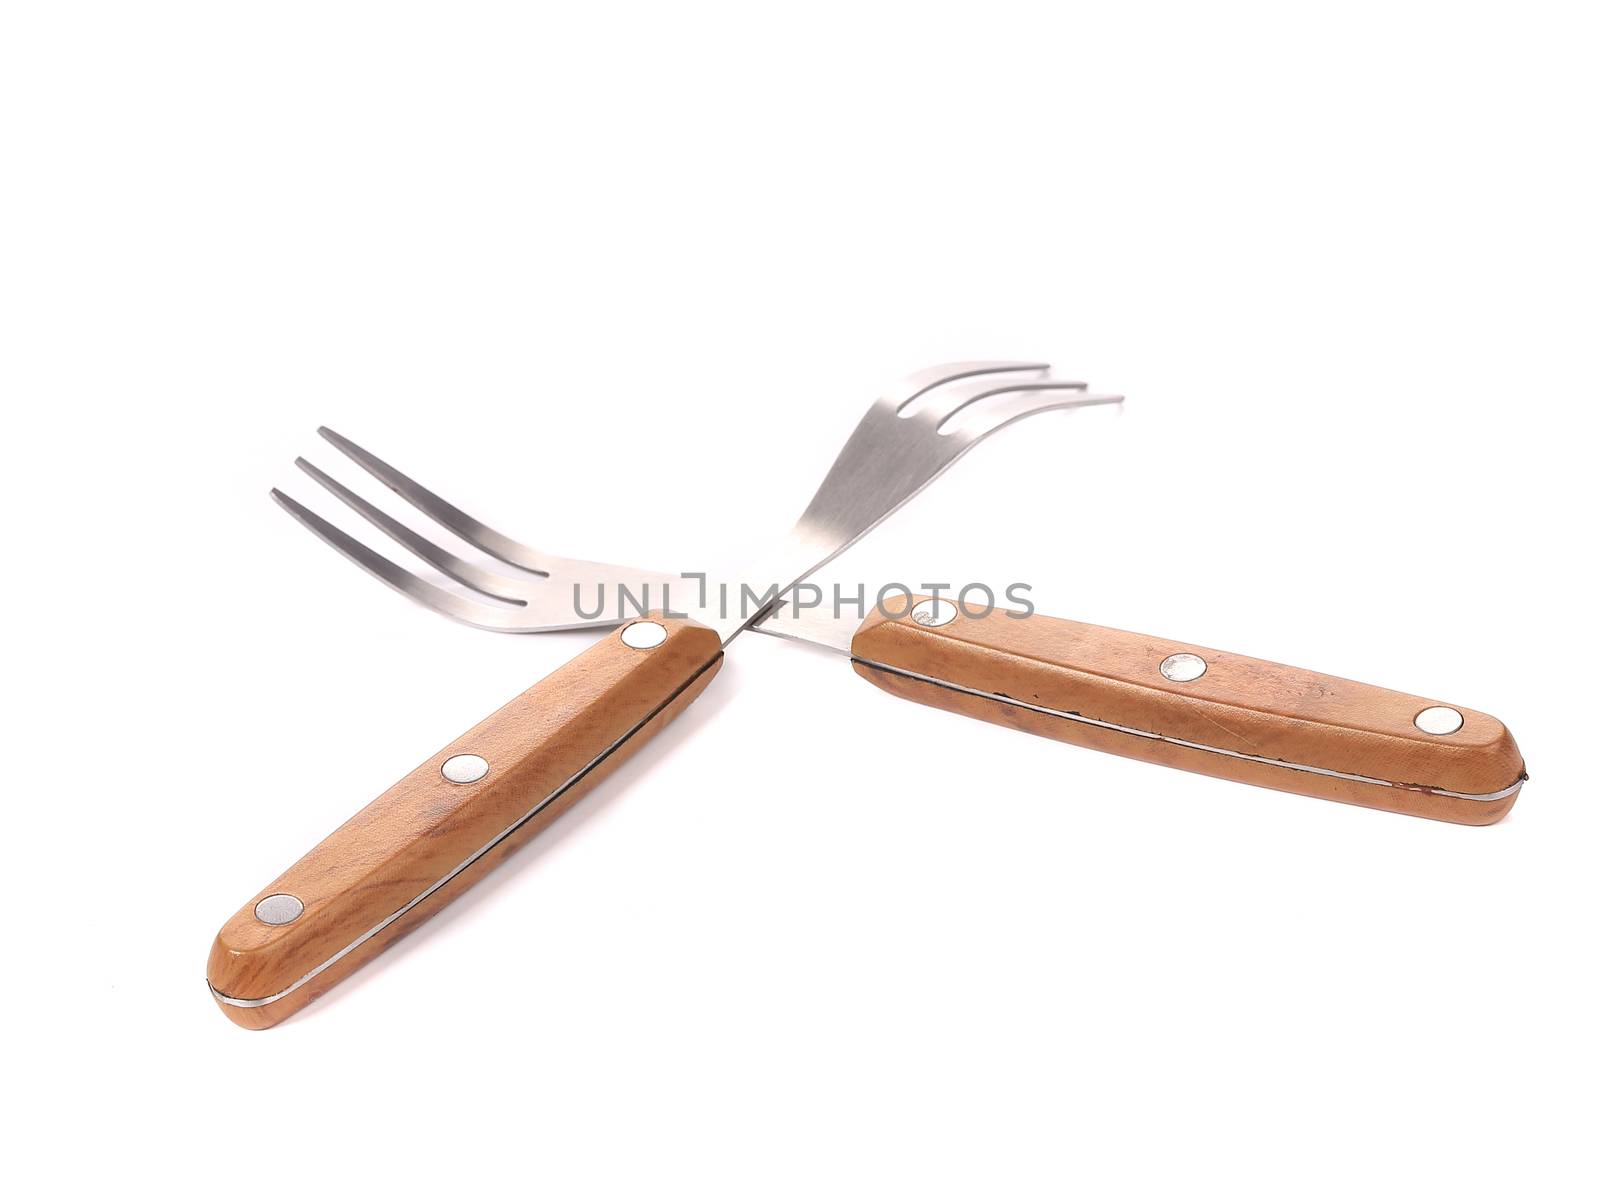 Two wooden handle forks. Isolated on a white background.